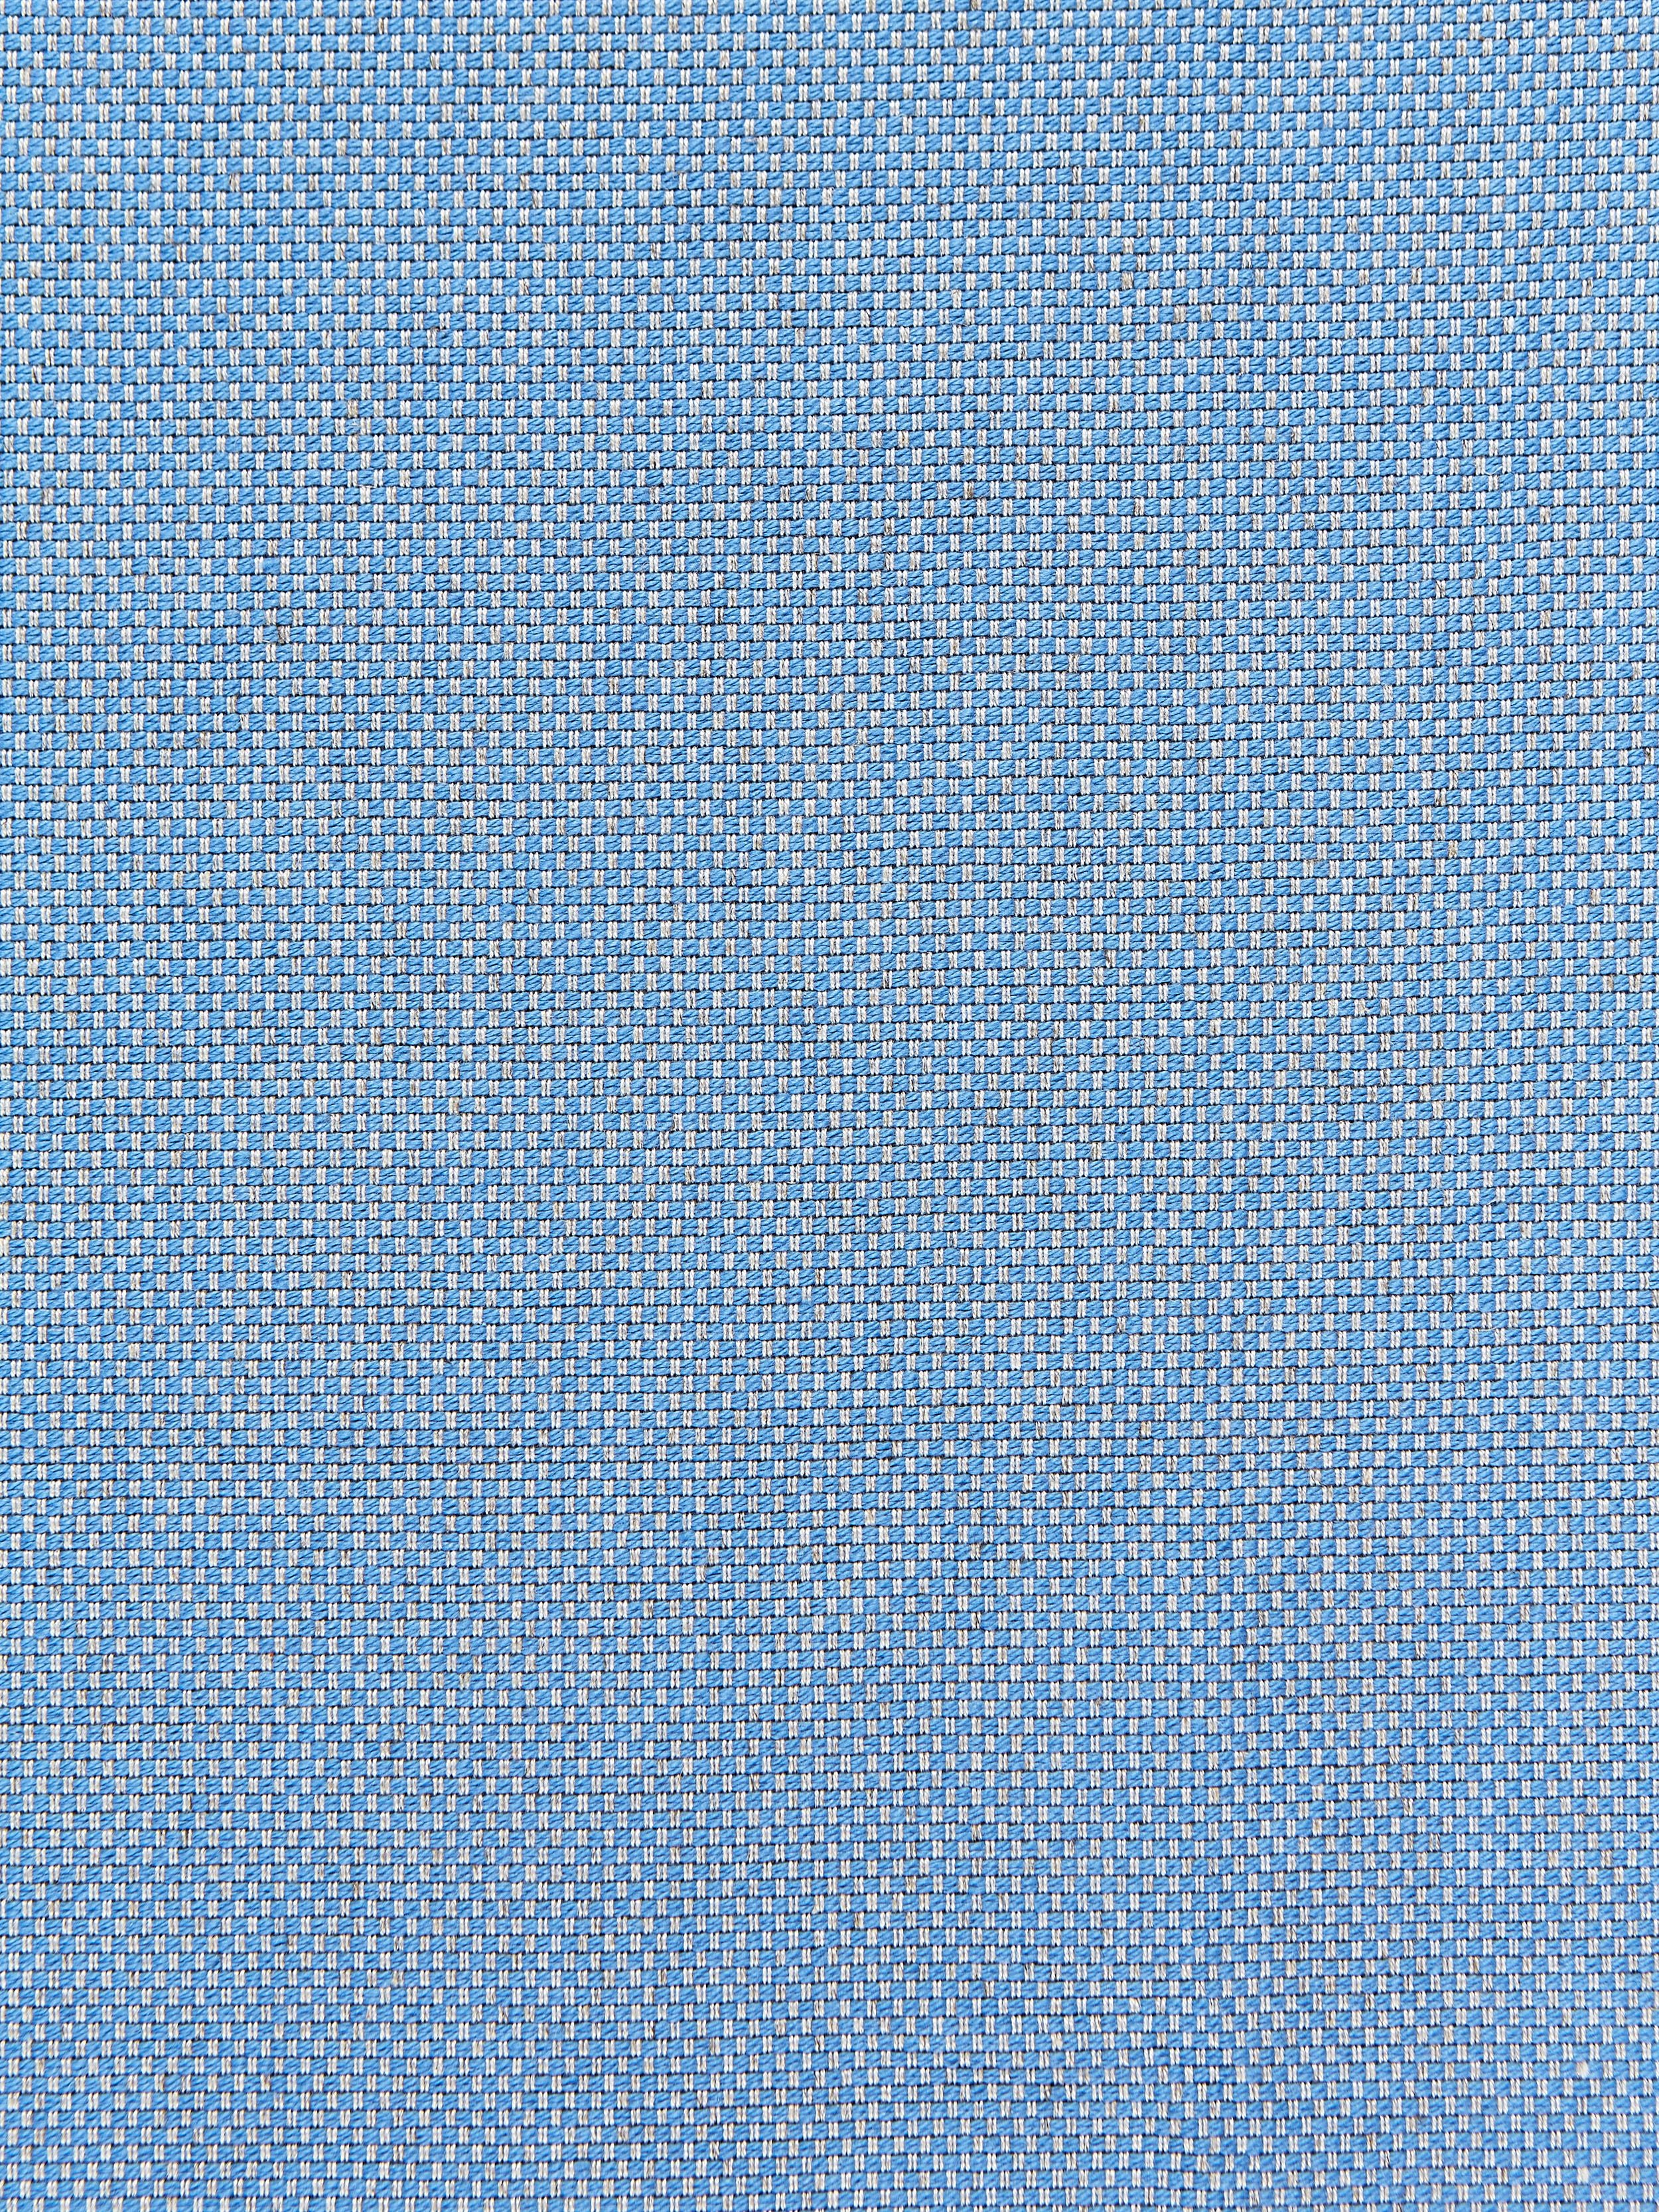 Prato Weave fabric in sky color - pattern number SC 000336393 - by Scalamandre in the Scalamandre Fabrics Book 1 collection